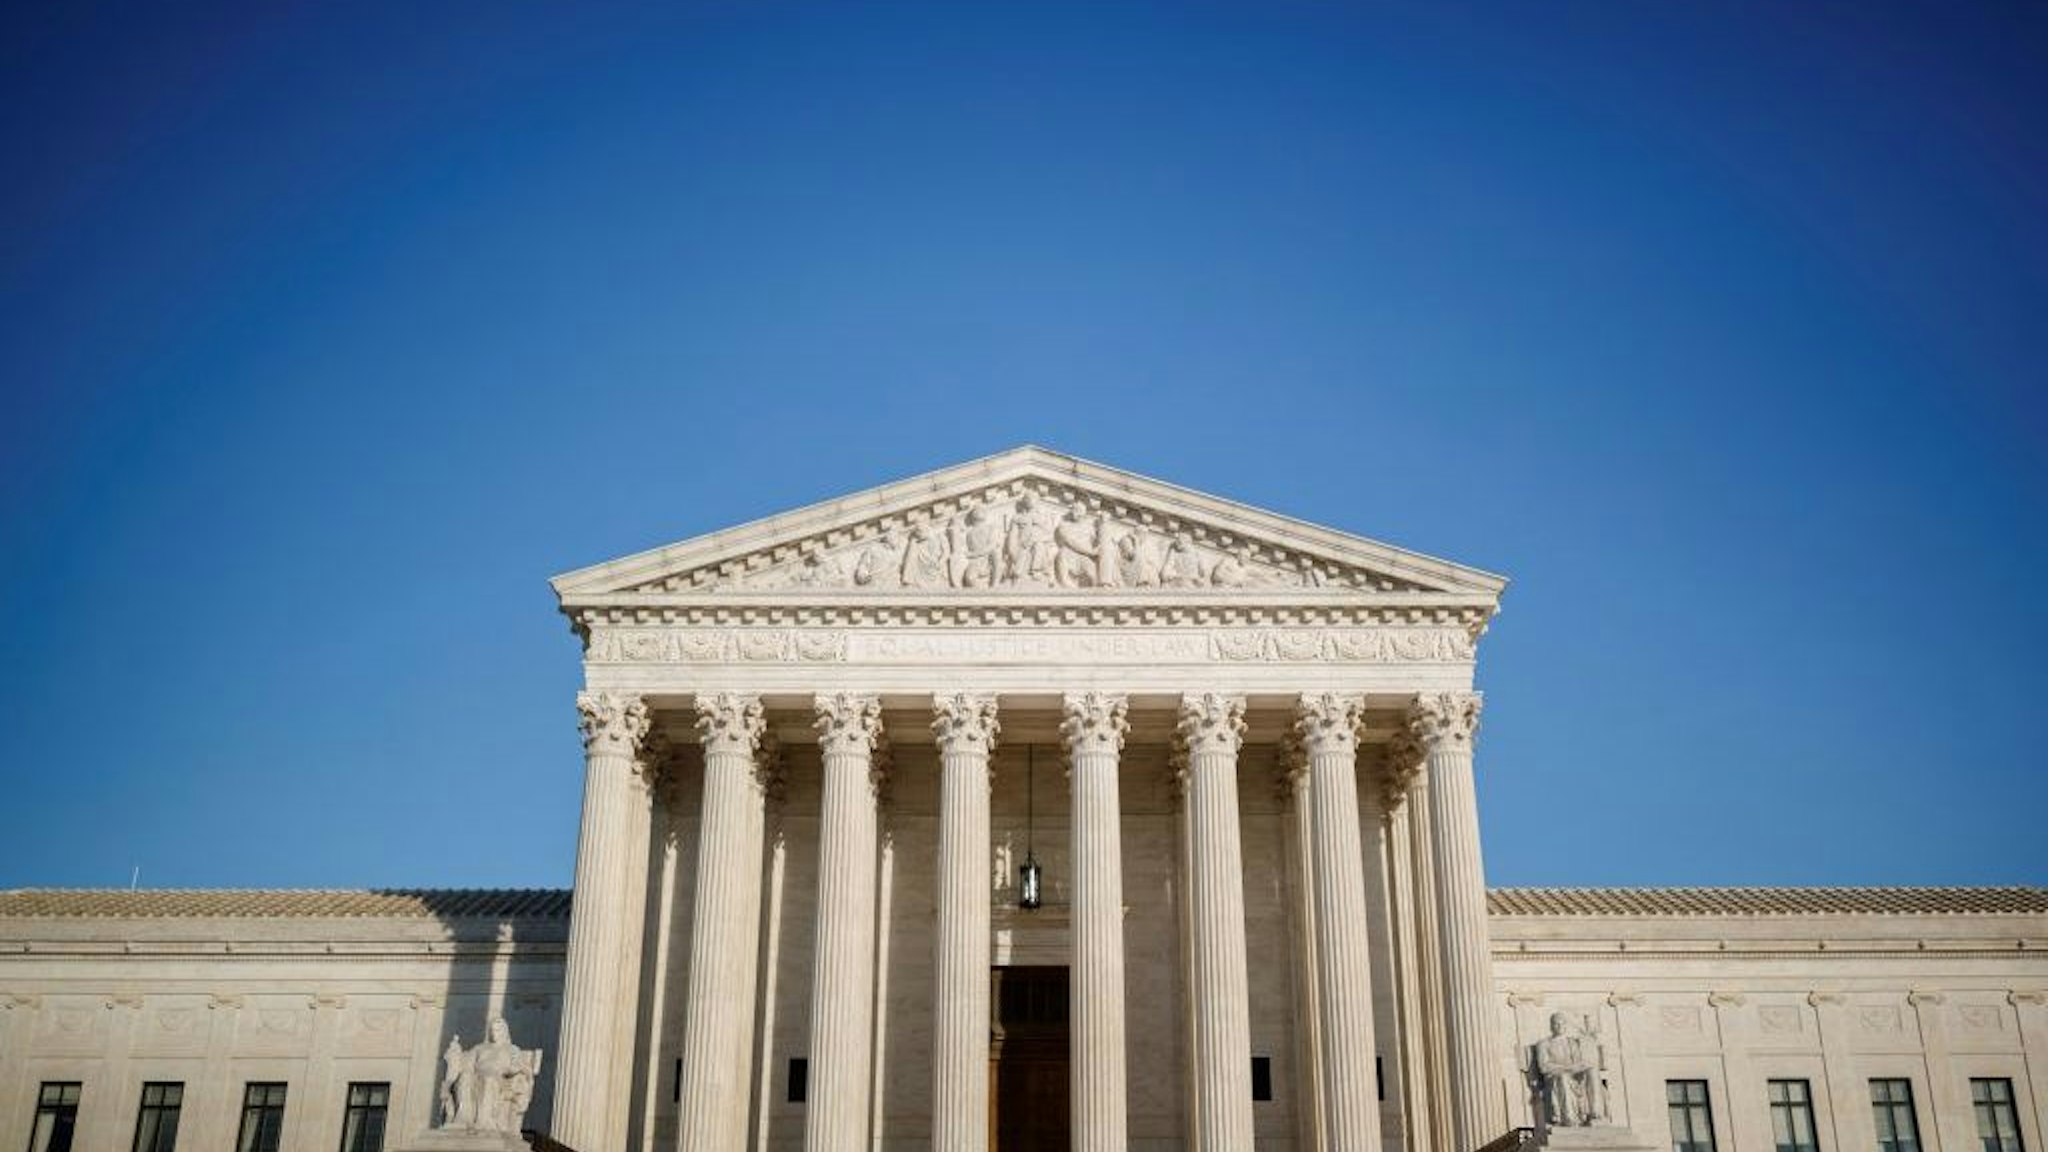 WASHINGTON, D.C., Oct. 26, 2020 -- Photo taken on Oct. 26, 2020 shows the U.S. Supreme Court in Washington, D.C., the United States. A divided U.S. Senate voted mostly along party line Monday to confirm Judge Amy Coney Barrett, President Donald Trump's nominee, to the Supreme Court, succeeding late Justice Ruth Bader Ginsburg. (Photo by Ting Shen/Xinhua via Getty) (Xinhua/Ting Shen via Getty Images)